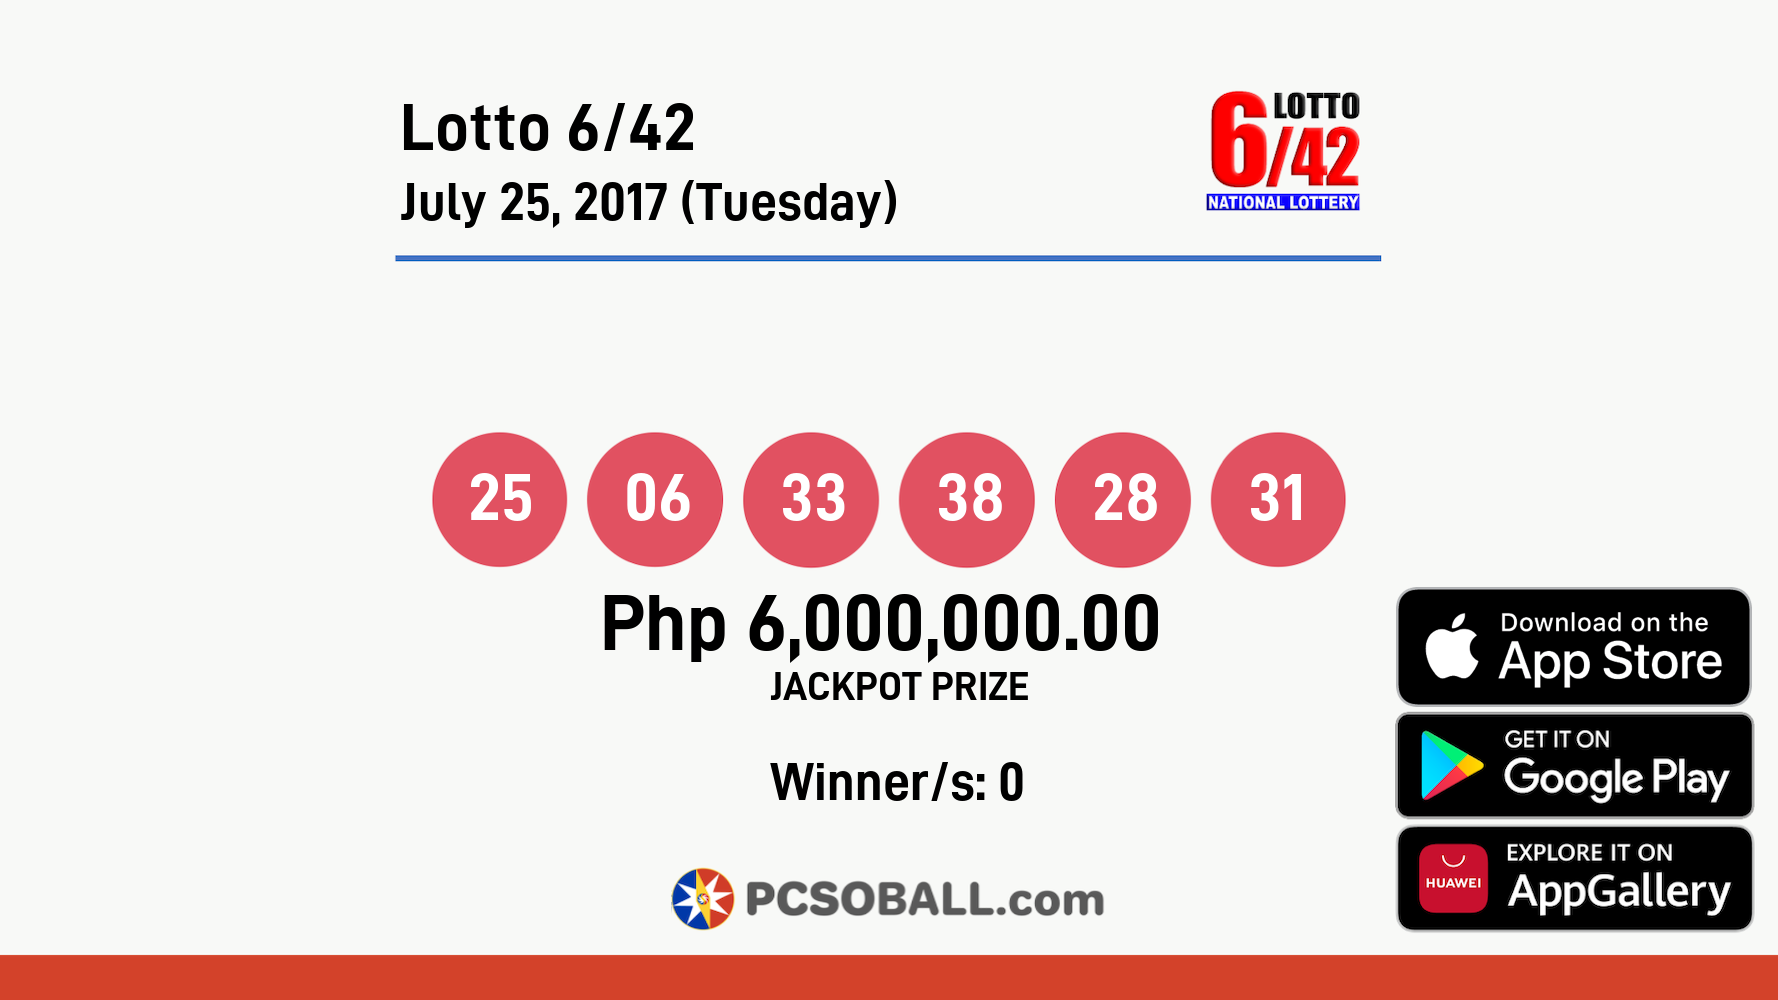 Lotto 6/42 July 25, 2017 (Tuesday) Result